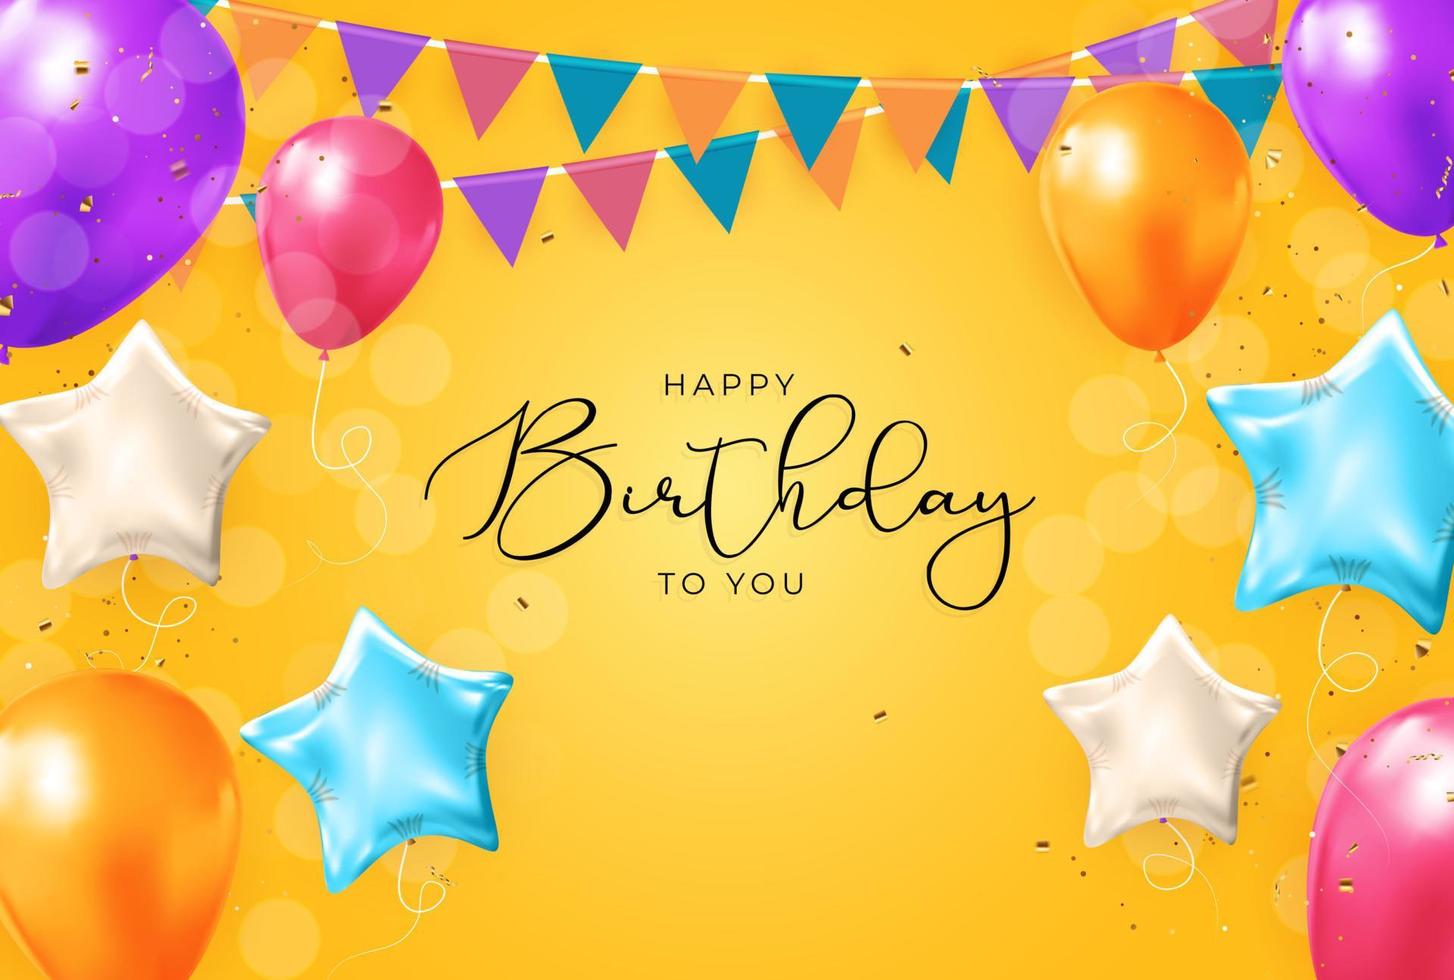 Happy Birthday congratulations banner design with Confetti, Balloons and Glossy Glitter Ribbon for Party Holiday Background. Vector Illustration